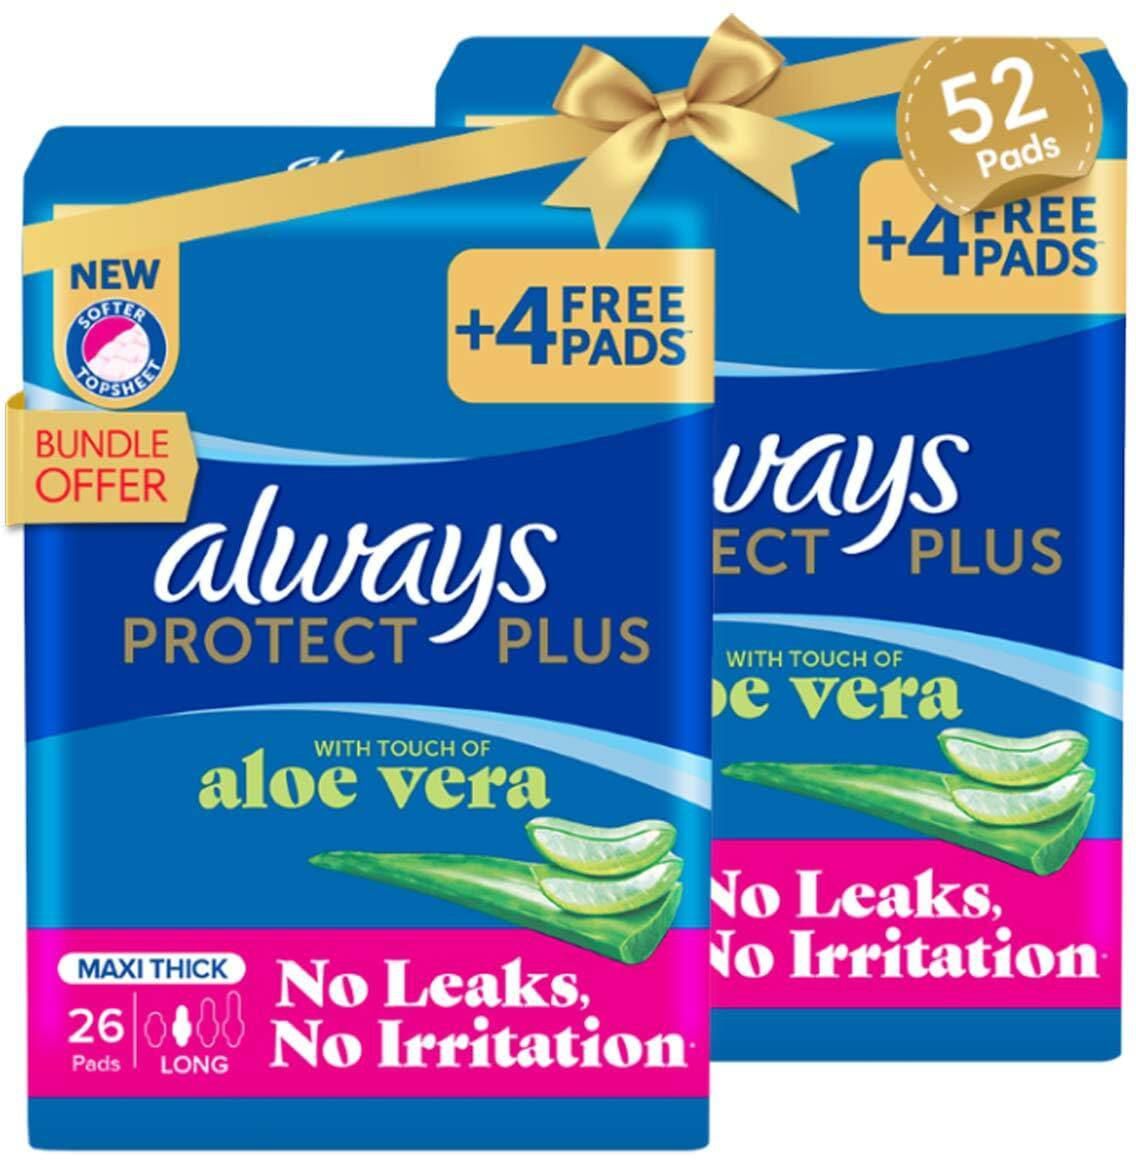 Always Protect Plus Pads with Touch of Aloe Vera - Long - Maxi Thick - 52 Pads